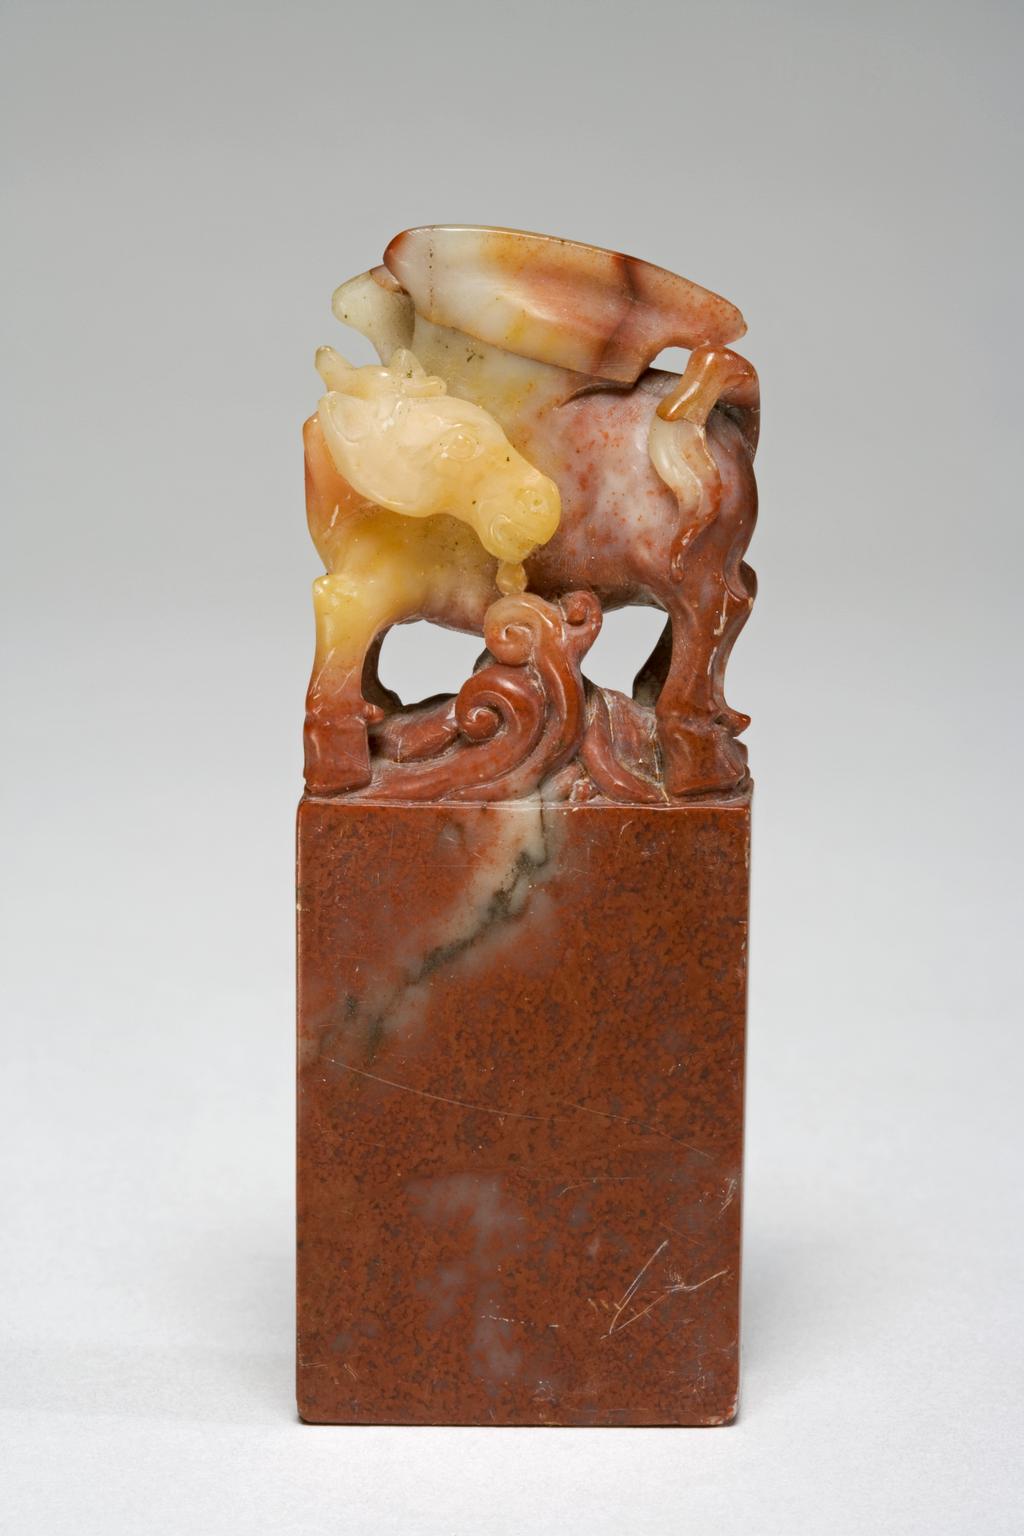 An image of Soapstone seal, with a finial in the form of a winged unicorn, carved with the characters Dan yu (pale moon). Possibly an 'art name' seal of a painter or calligrapher. Height 7 cm, width 2.7 cm, 1800-1899. Chinese.